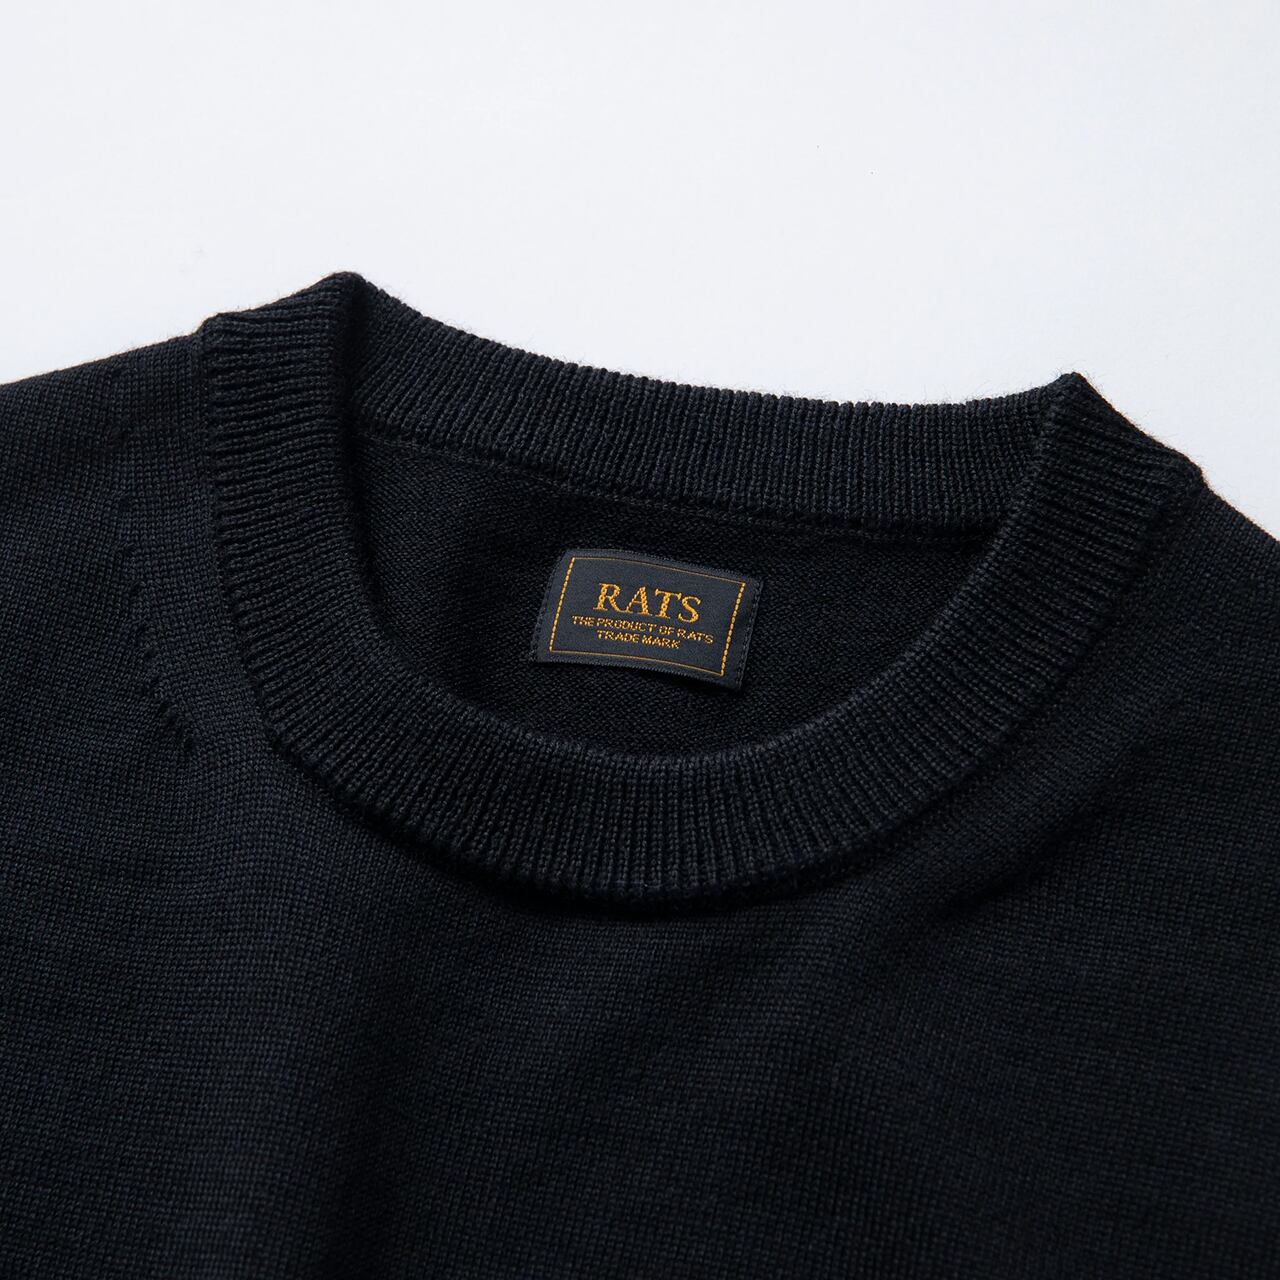 RATS(ラッツ) / HIGH GAUGE CREW NECK KNIT(22'RN-0910)(クルーネックニット) | FAGRASS BASE  STORE powered by BASE